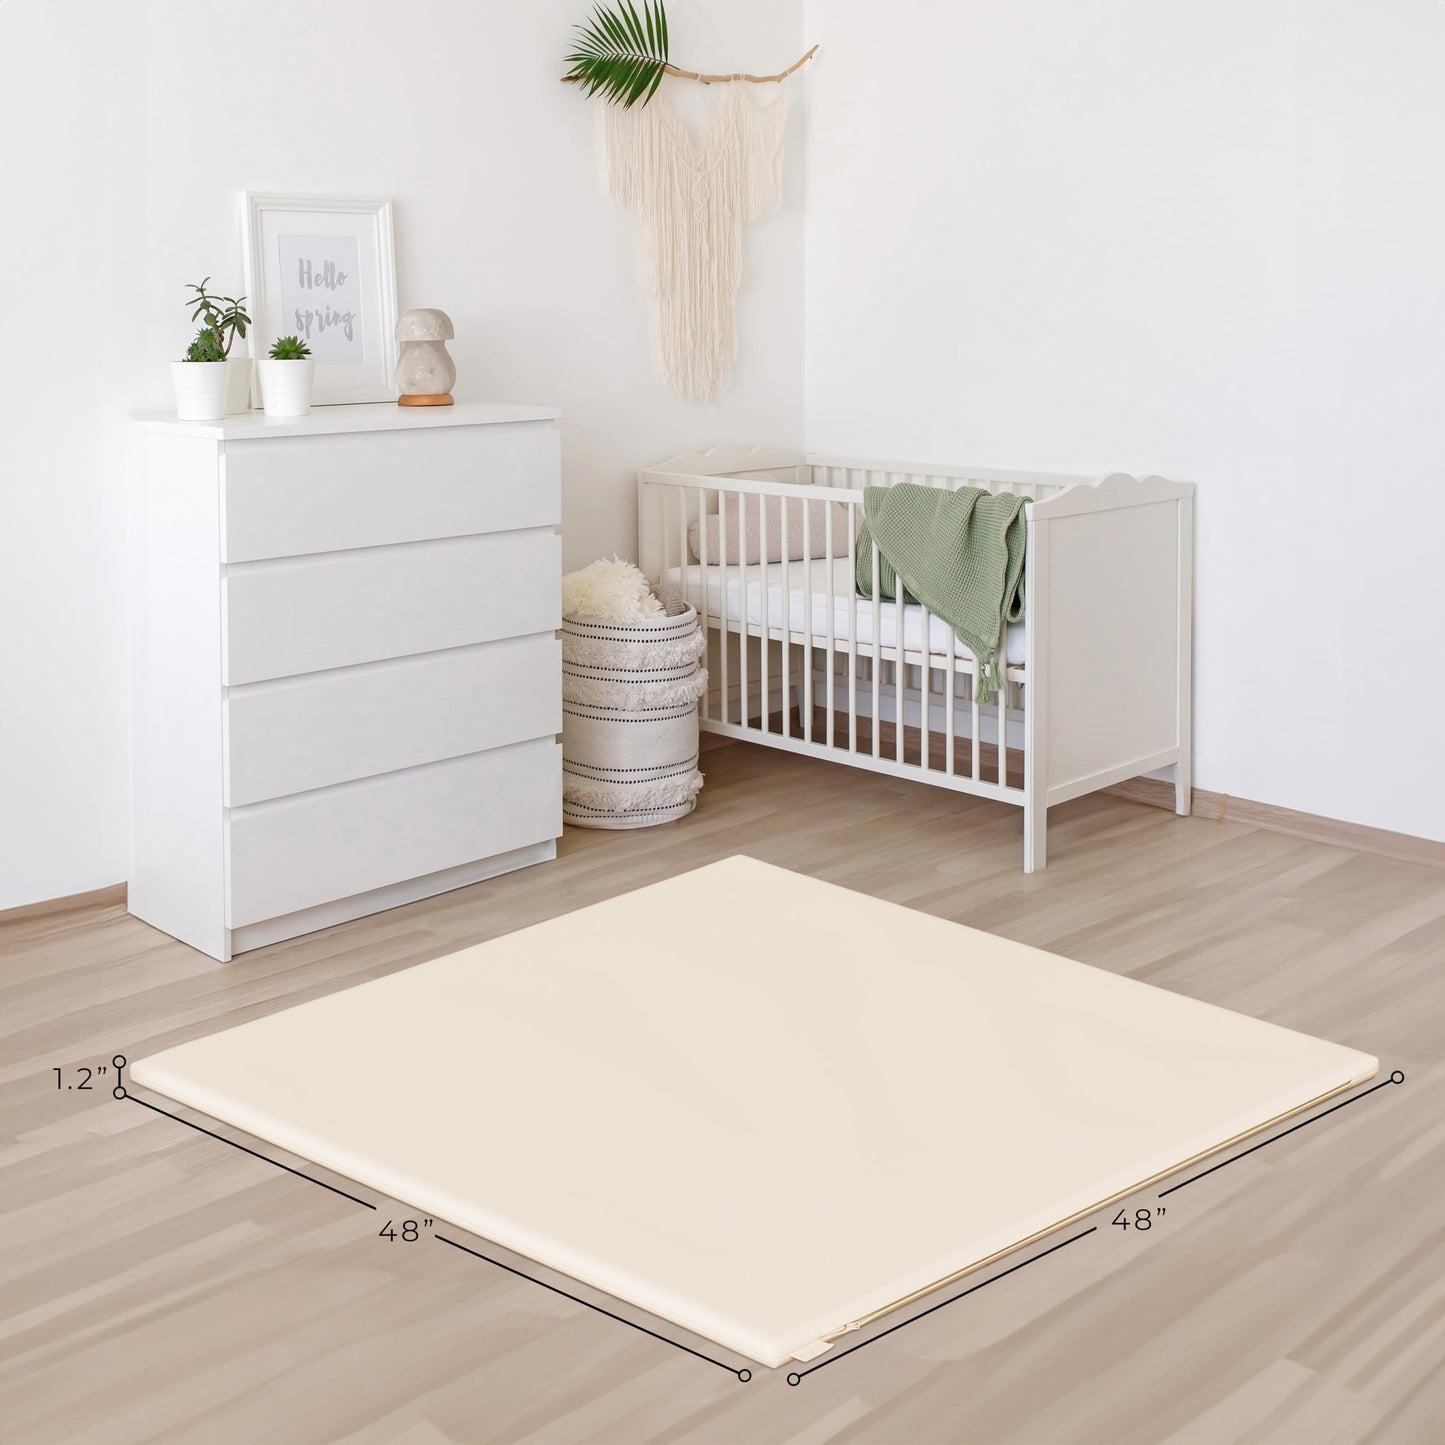 Stylish Vegan Leather Baby Play Mat - Soft, Easy to Clean Floor Mat Creates A Safe Play Area for Your Baby - The Perfect Modern Foam Playmat Fits Nicely with Your Kids Playroom Or Home Decor